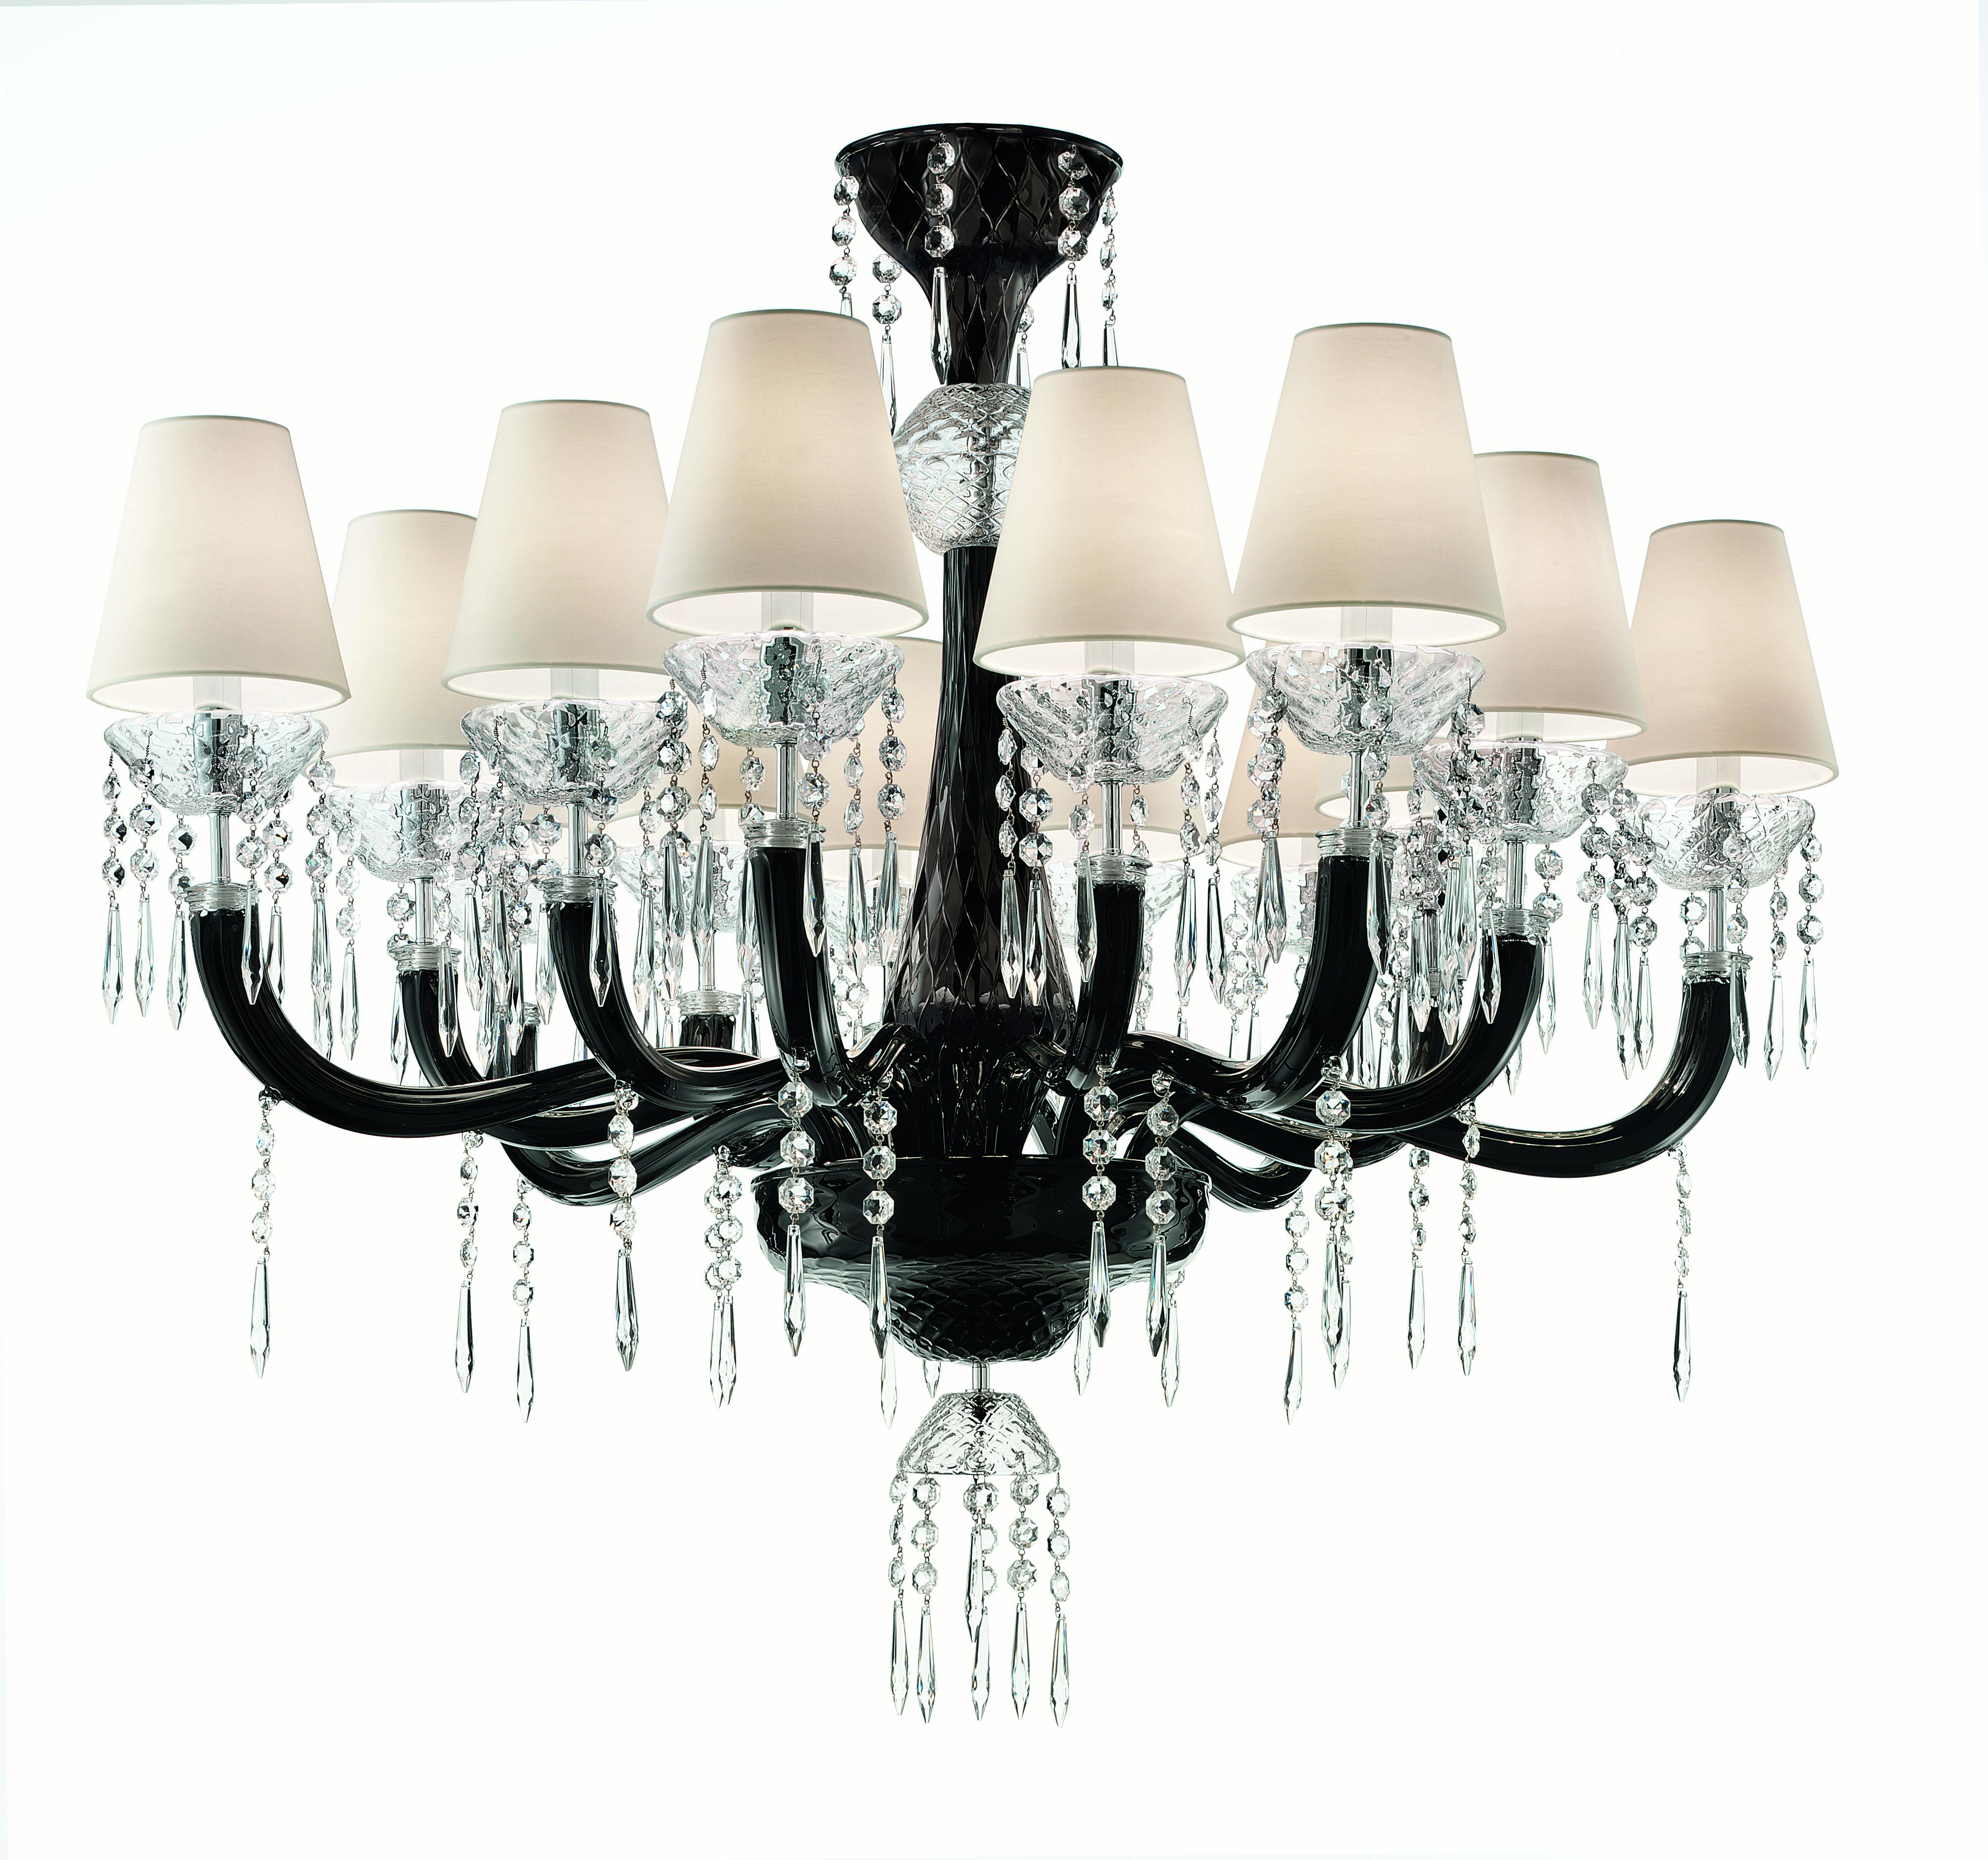 Black (Black_NN) President 5695 14 Chandelier in Glass with White Shade, by Barovier & Toso 5